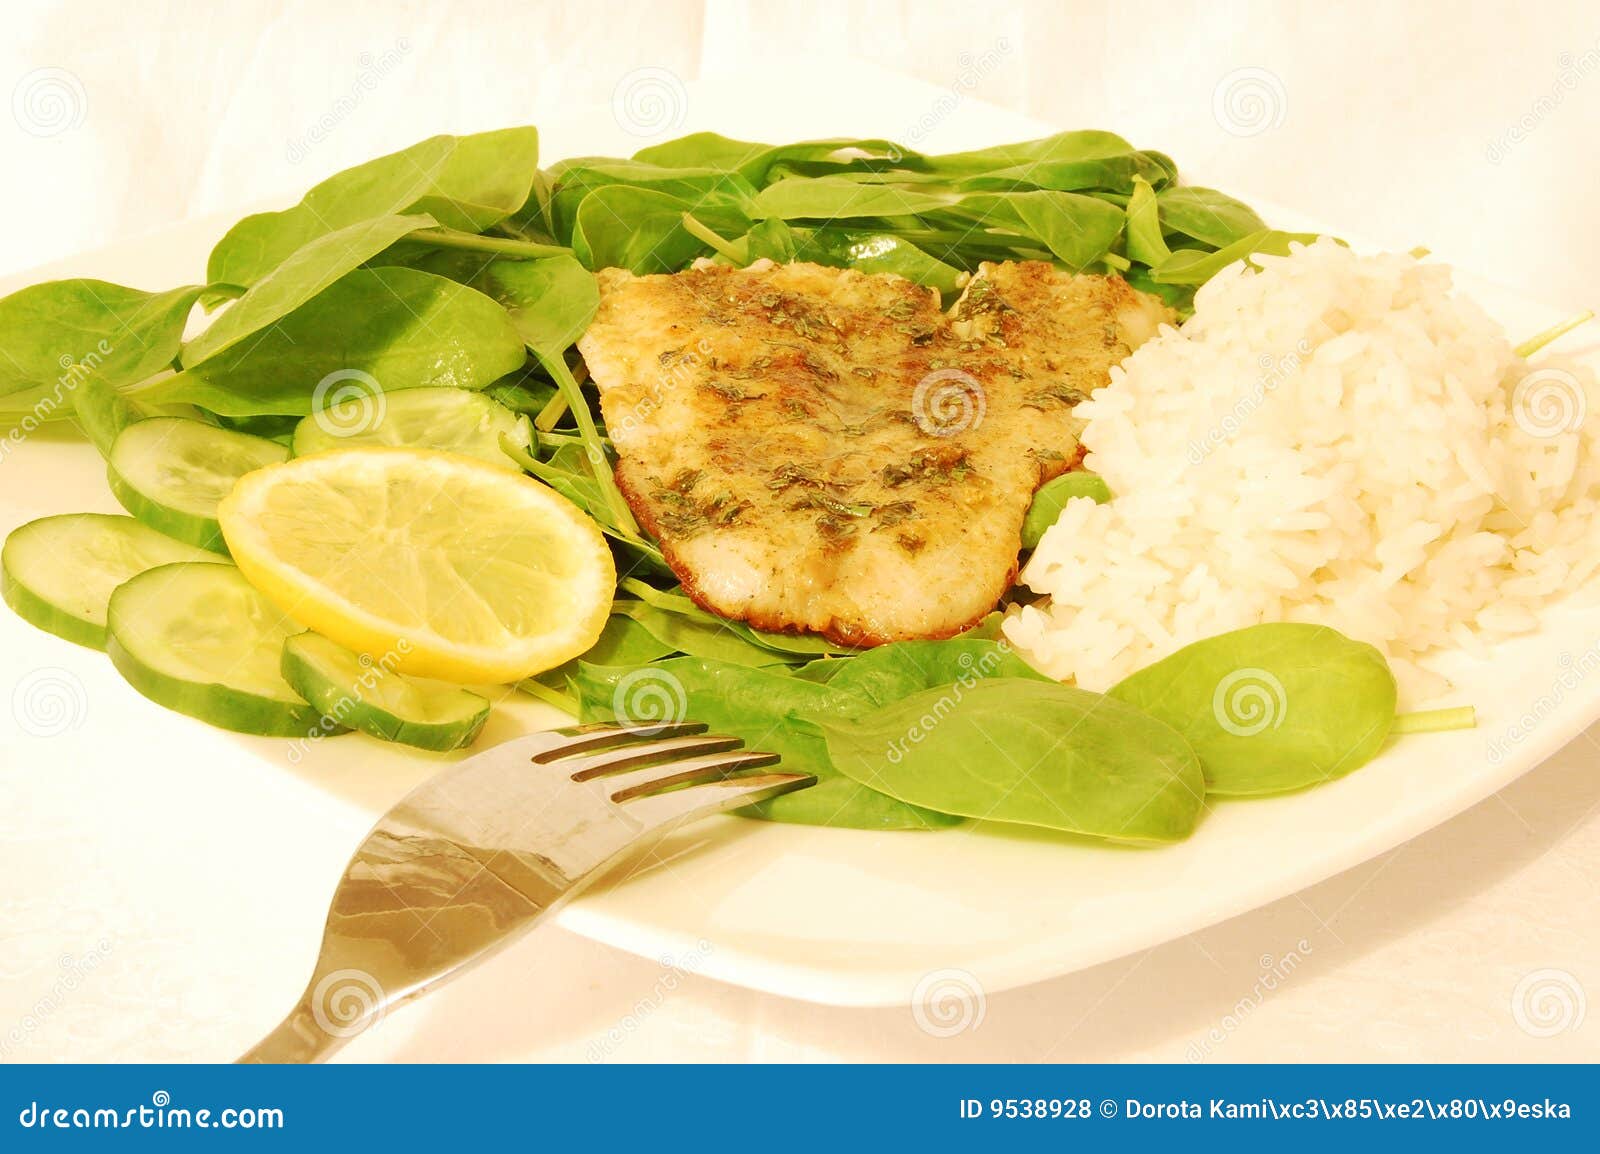 Grilled tilapia fish stock photo. Image of healthy, lunch - 9538928